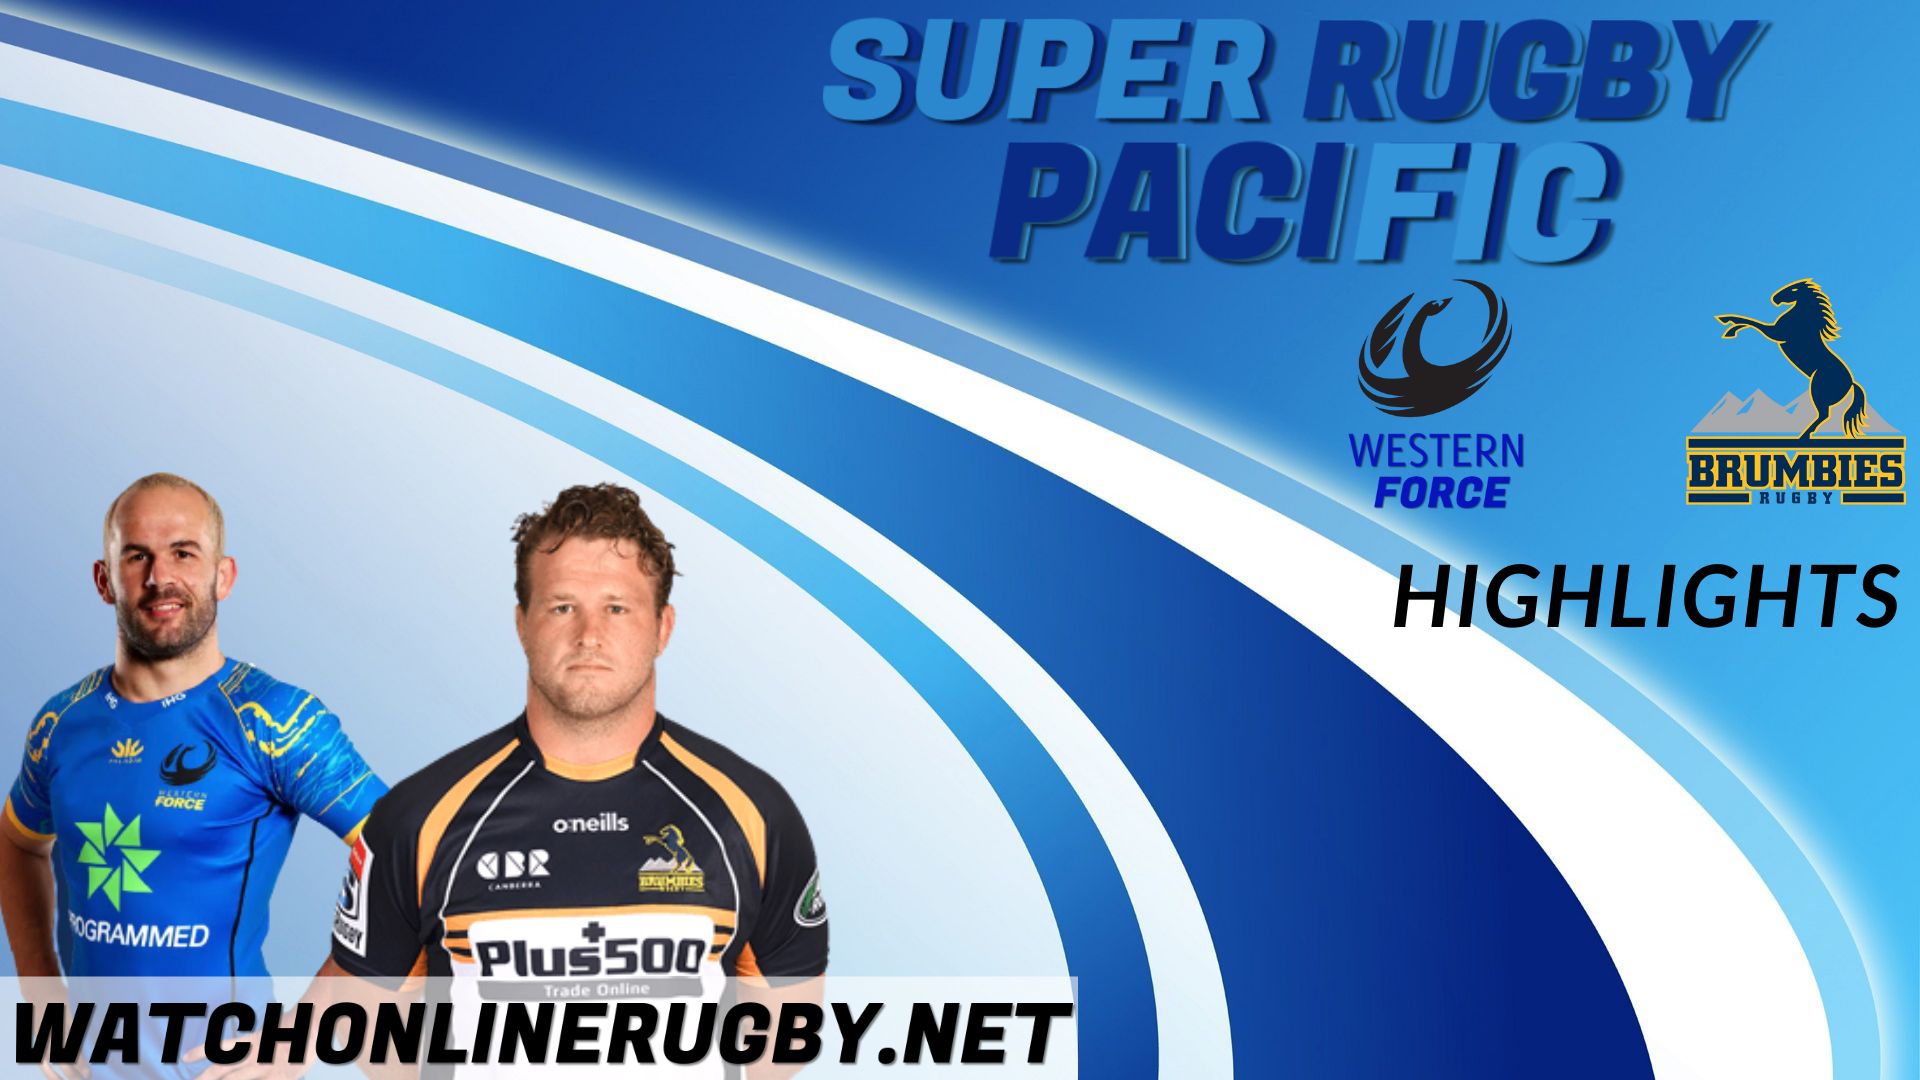 Brumbies Vs Western Force Super Rugby Pacific 2022 RD 1